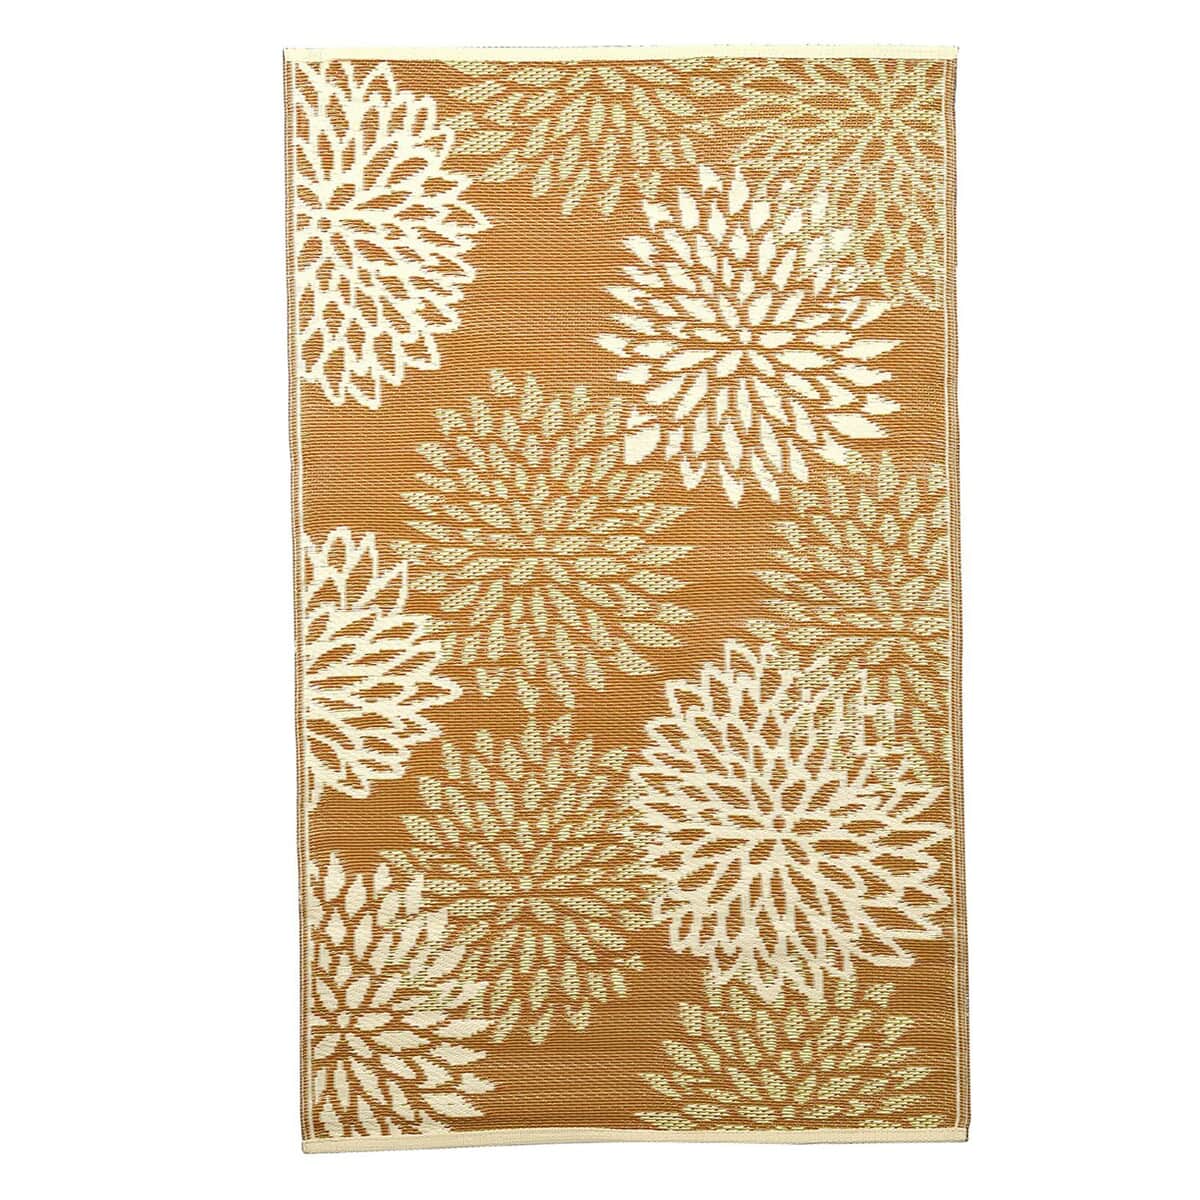 Ivory, Multi Color Polypropylene Floral Pattern Straw Mat, Plastic Straw Outdoor Rugs, Waterproof Portable Mat, Floor Mat image number 0